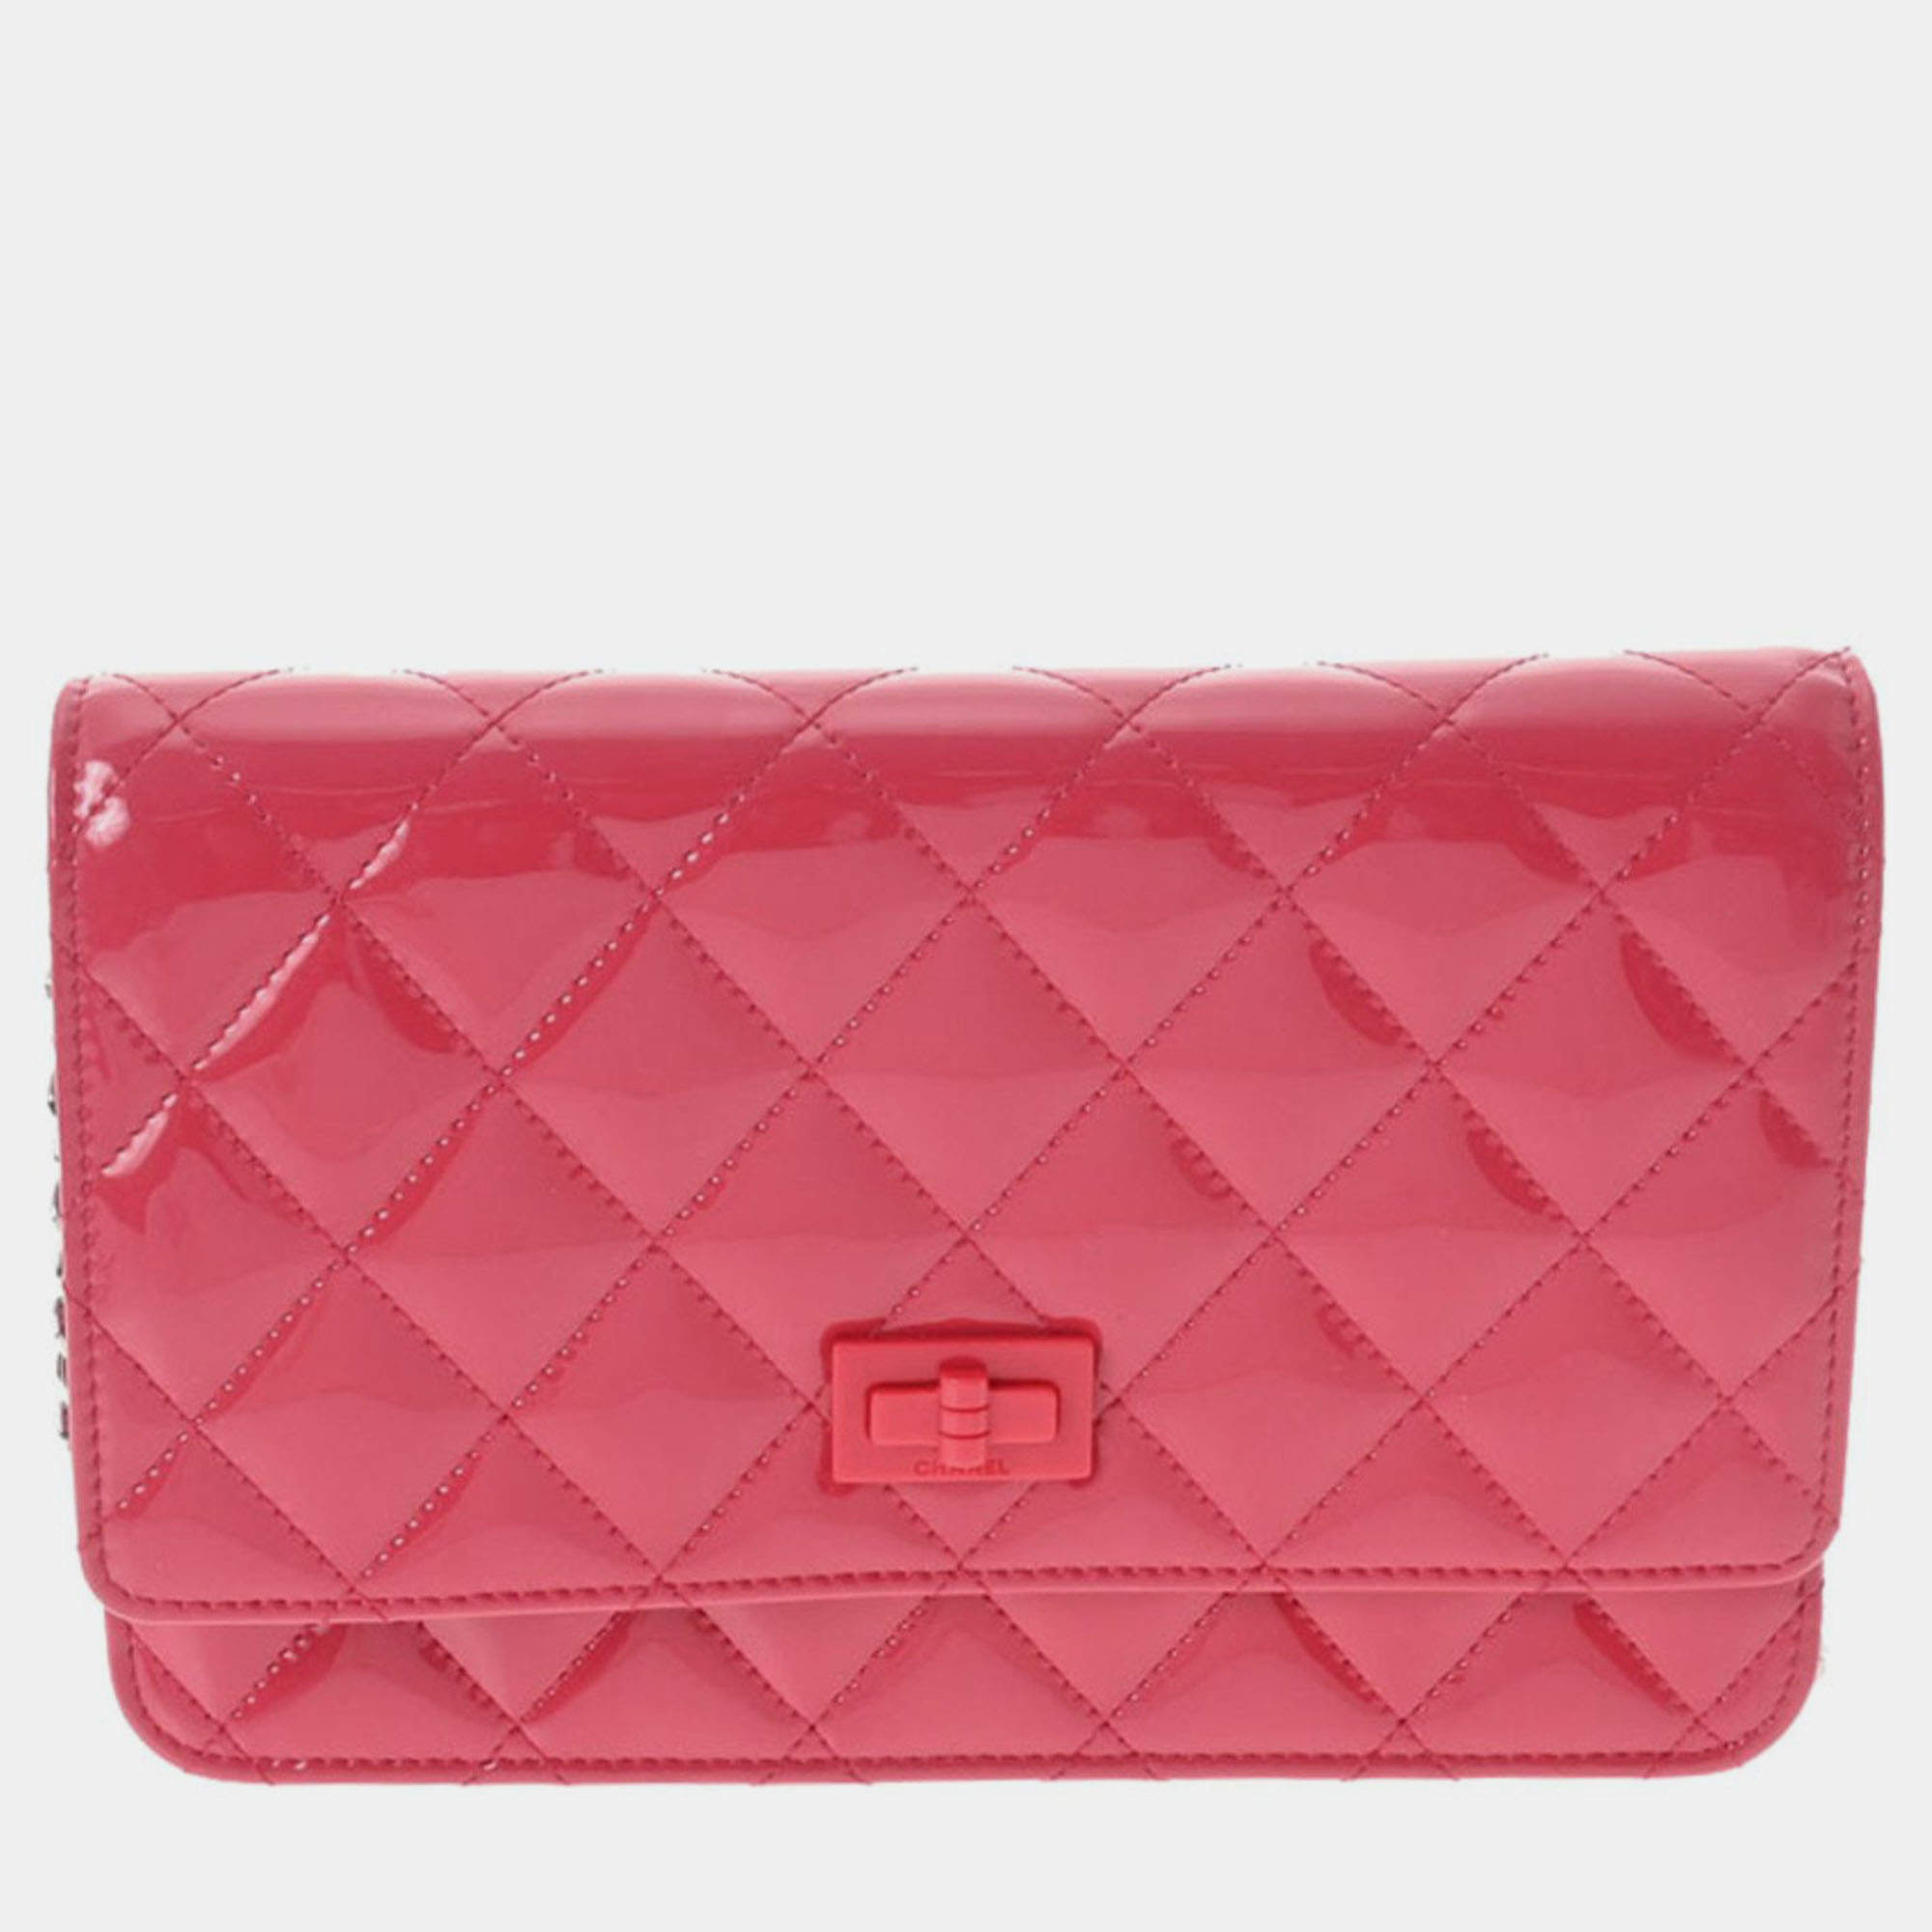 Chanel Pink Patent Leather Reissue 2.55 Wallet On Chain Chanel